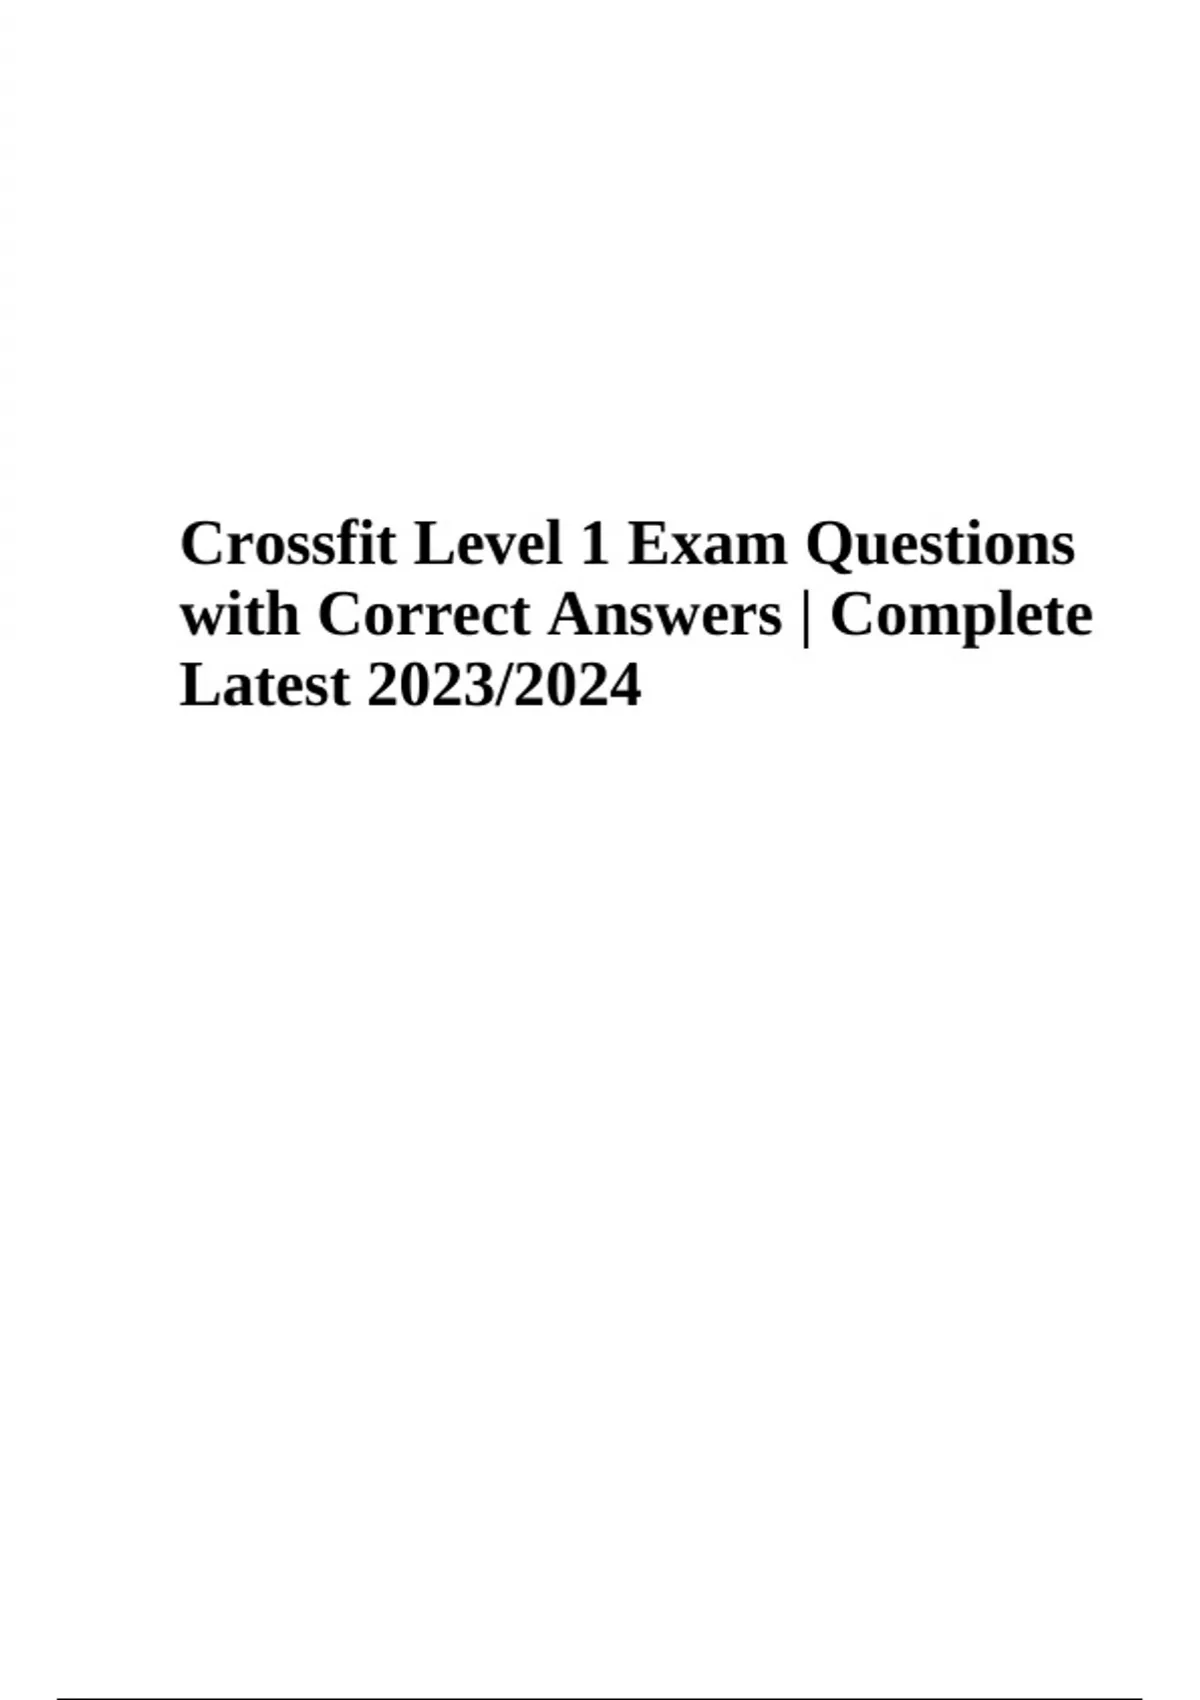 Crossfit Level 1 Questions with Correct Answers Latest 2023/2024 and